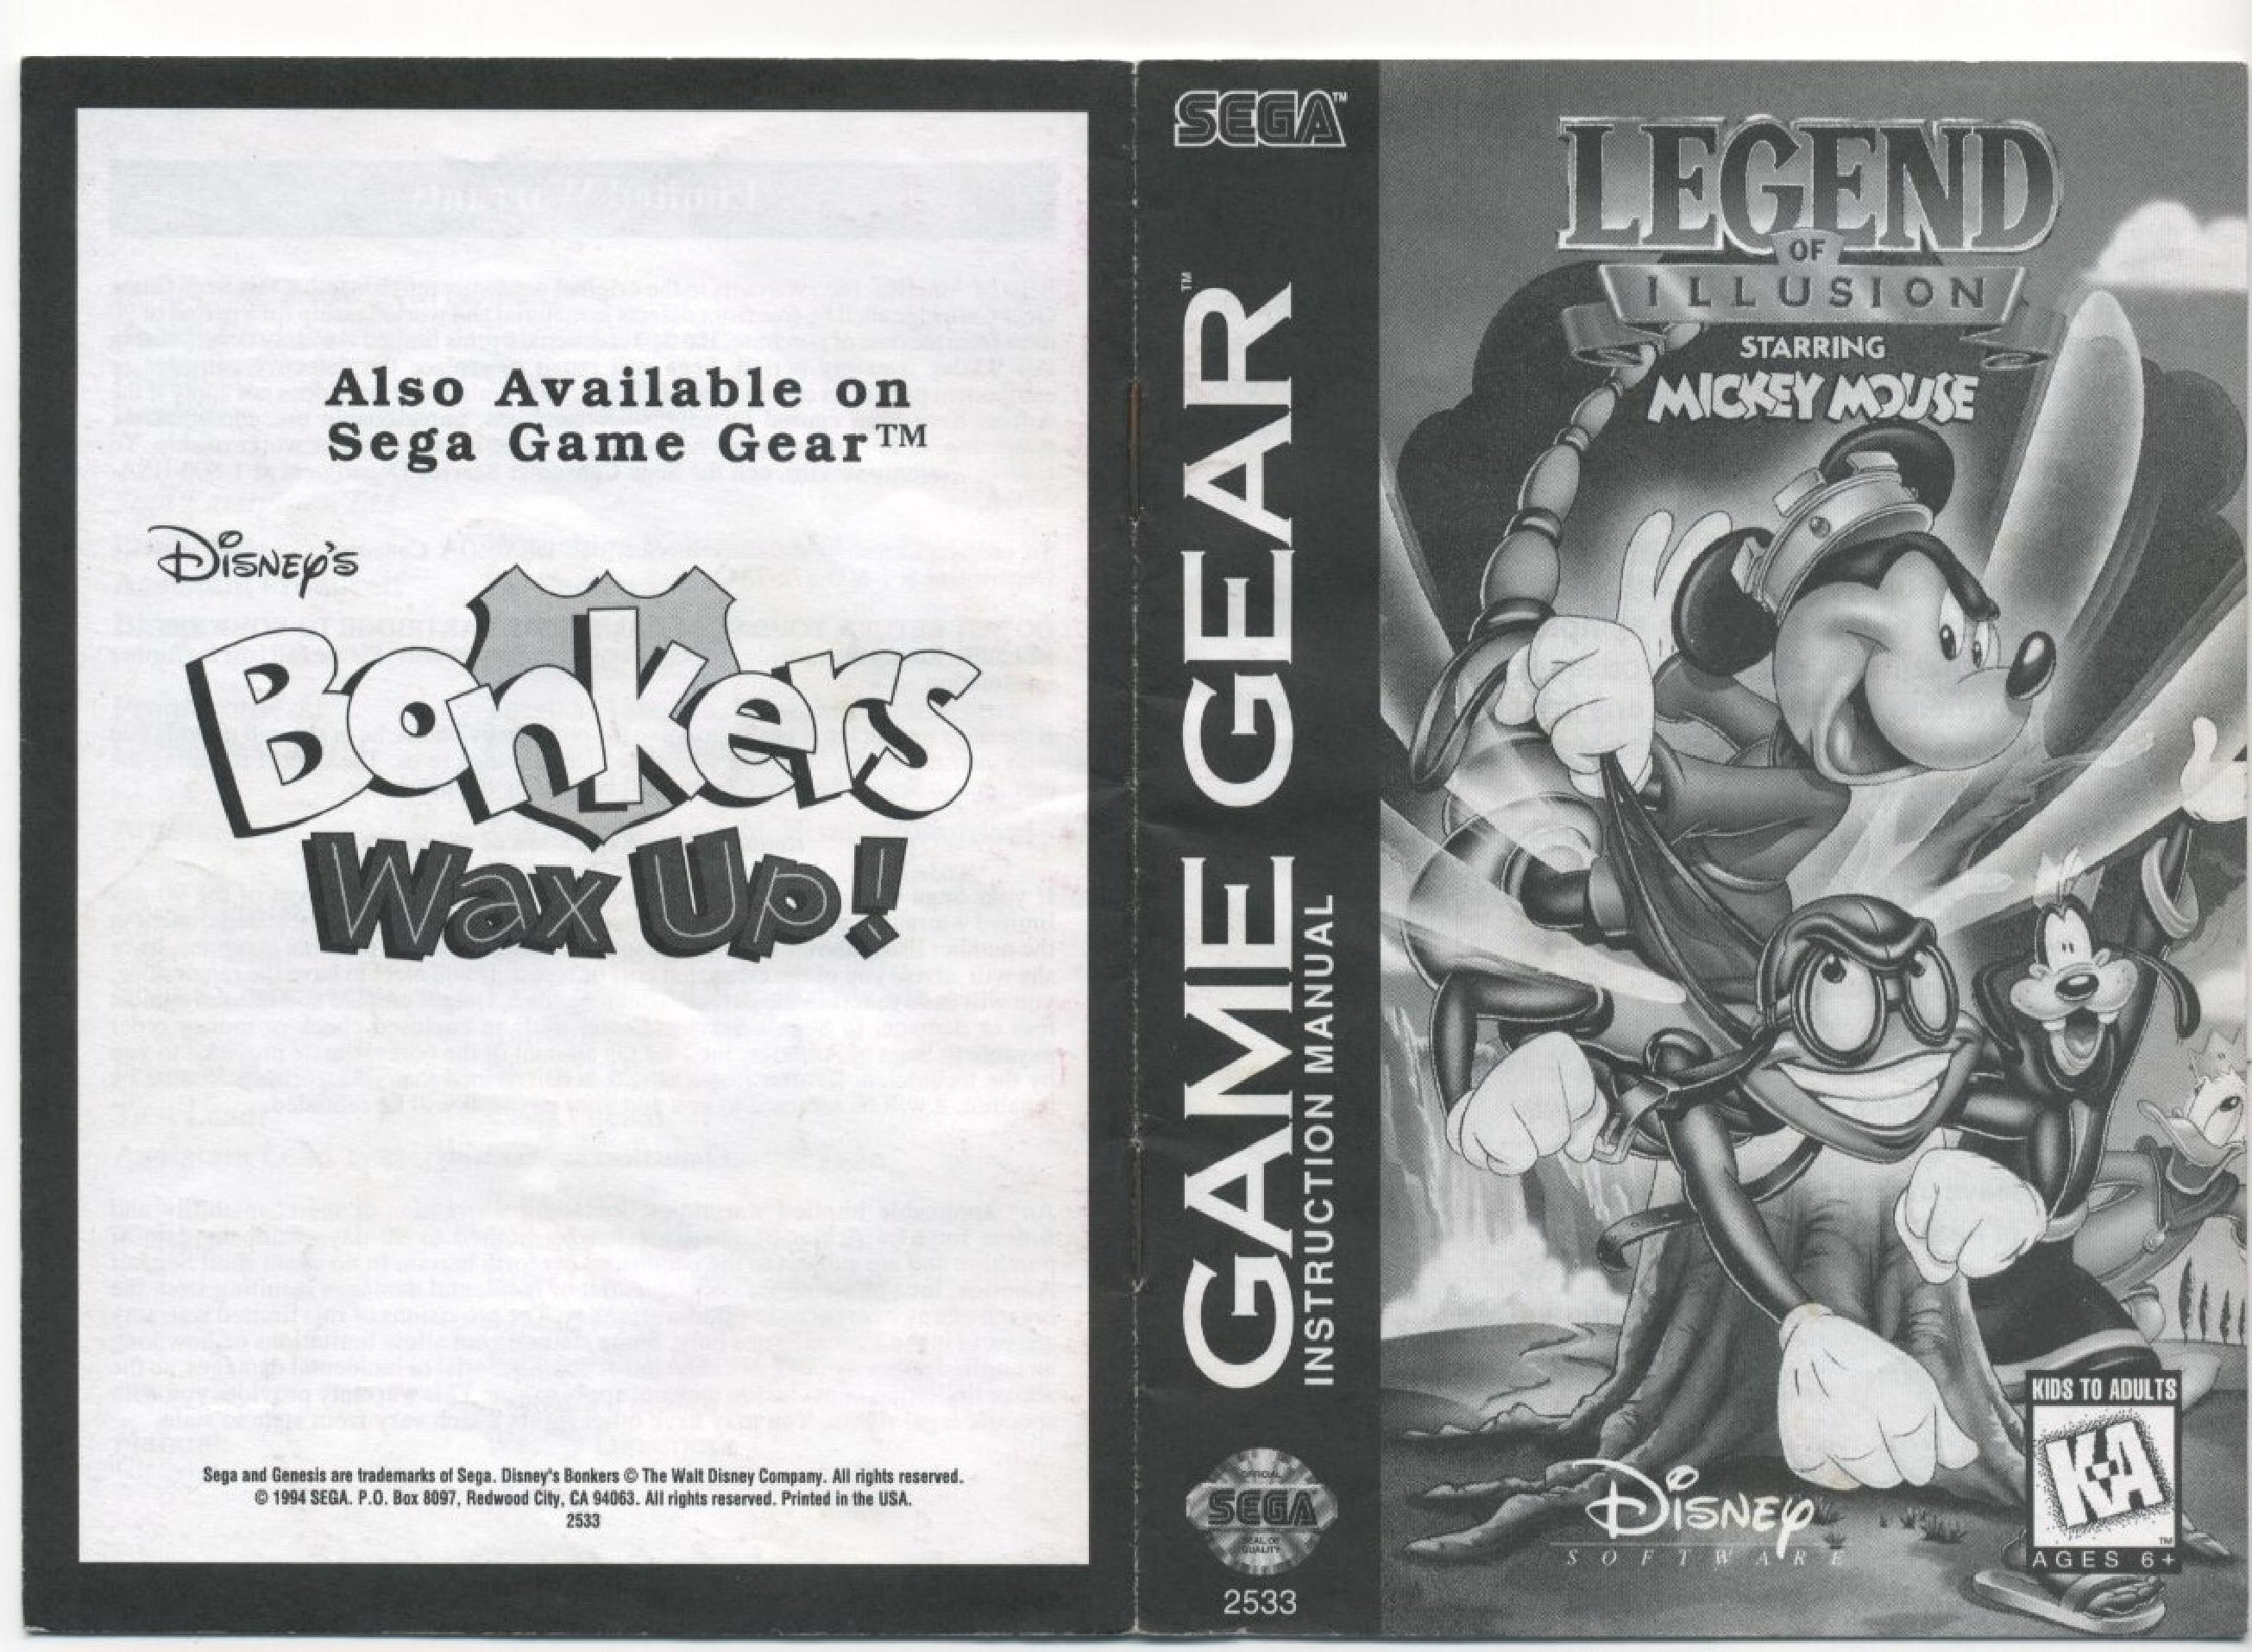 Legend of Illusion Starring Mickey Mouse GG US Manual.pdf